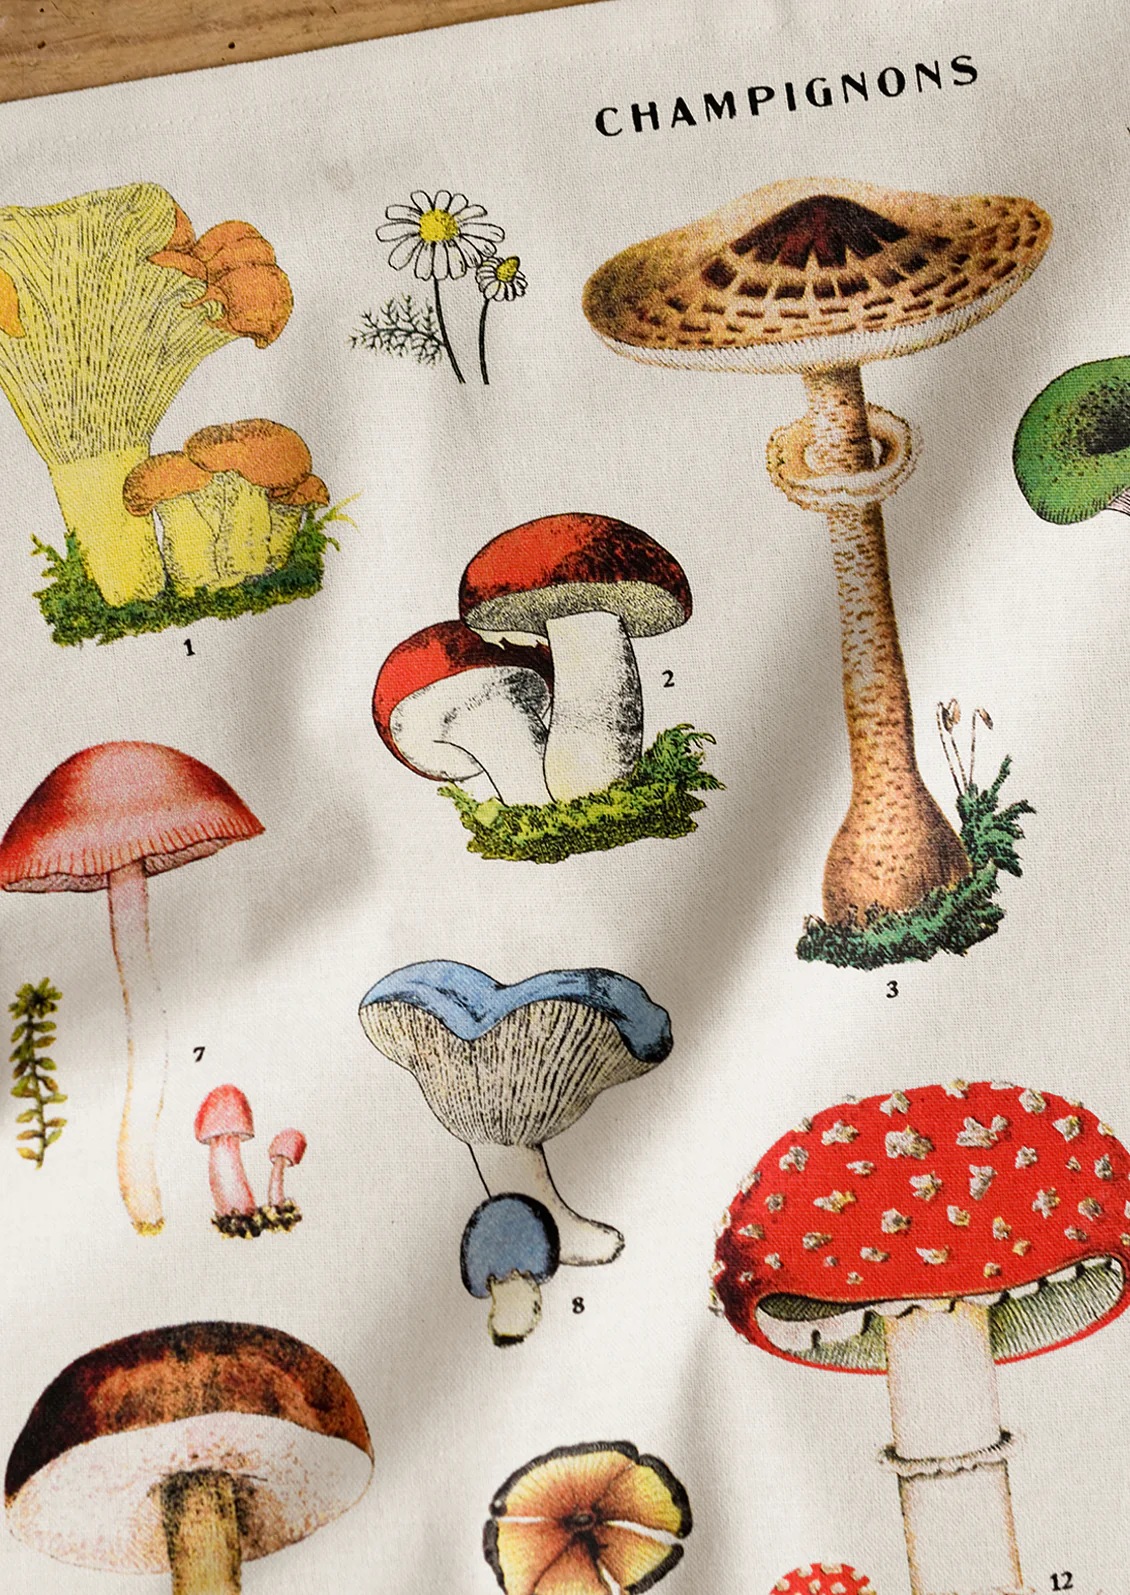 A close up photo showing the detail of the mushrooms printed on the napkins.